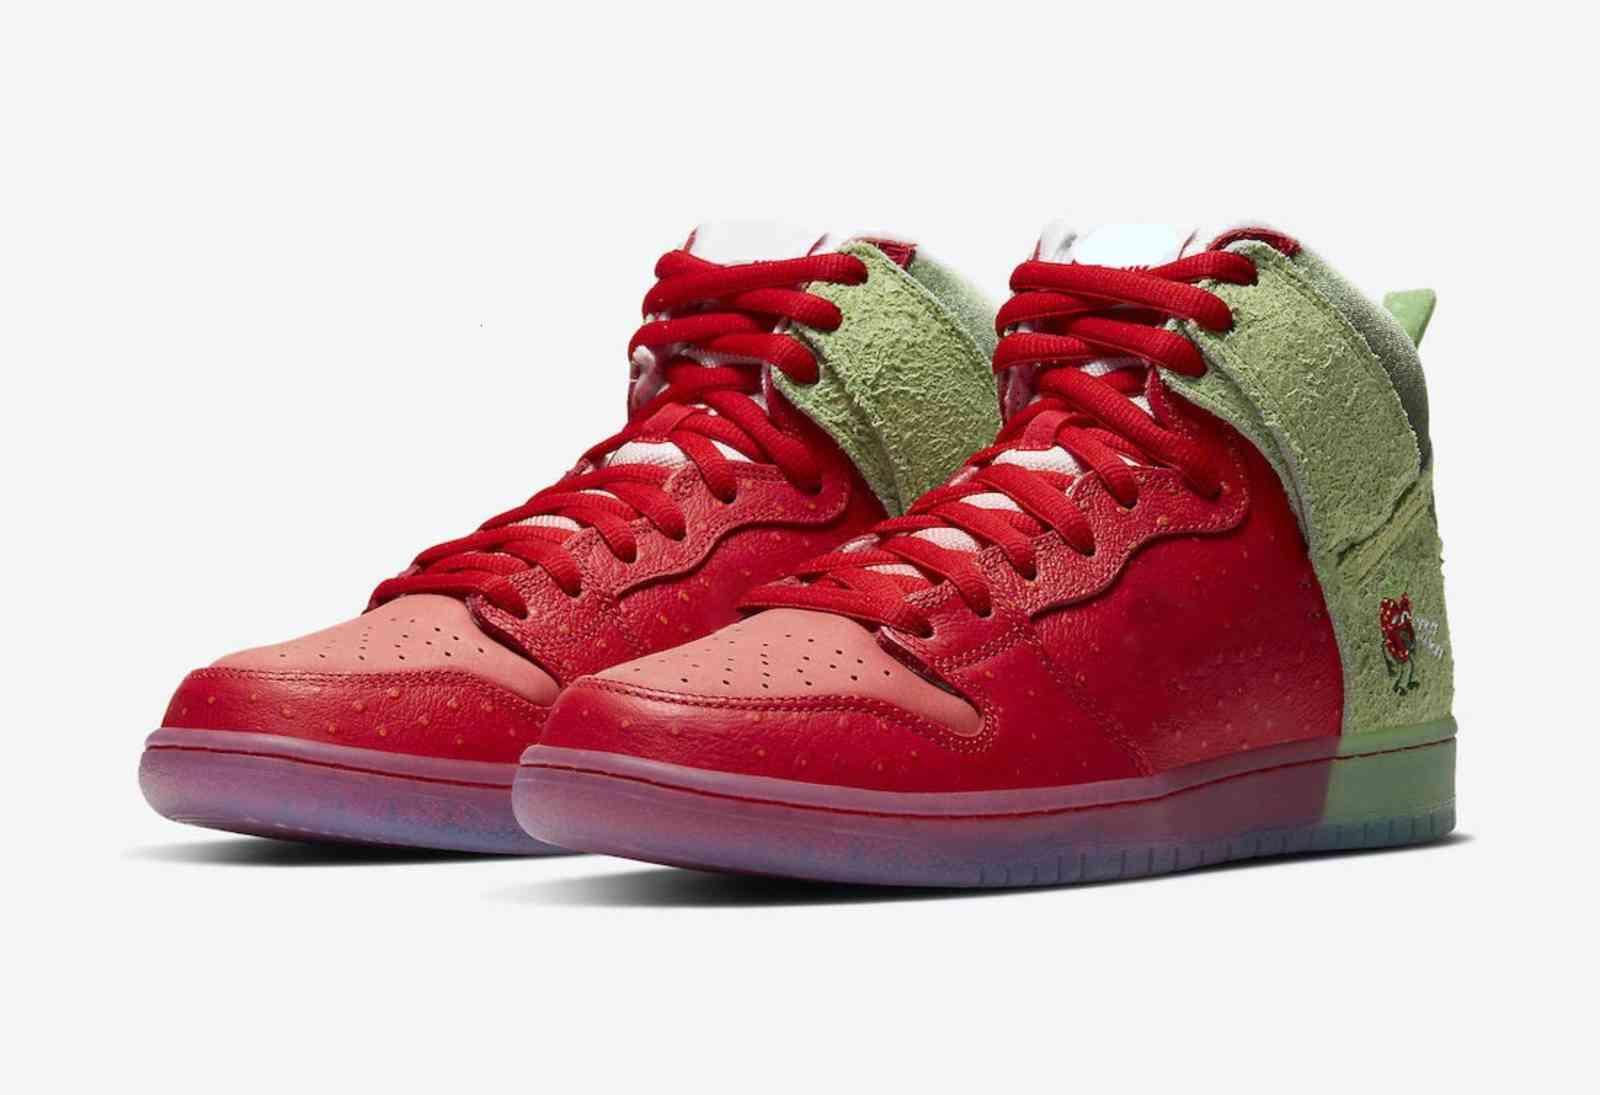 

2021 Authentic SB Shoes SB High Strawberry Cough University Red/Spinach Green-Magic Ember Men Women Outdoor Sports Sneakers With Original np